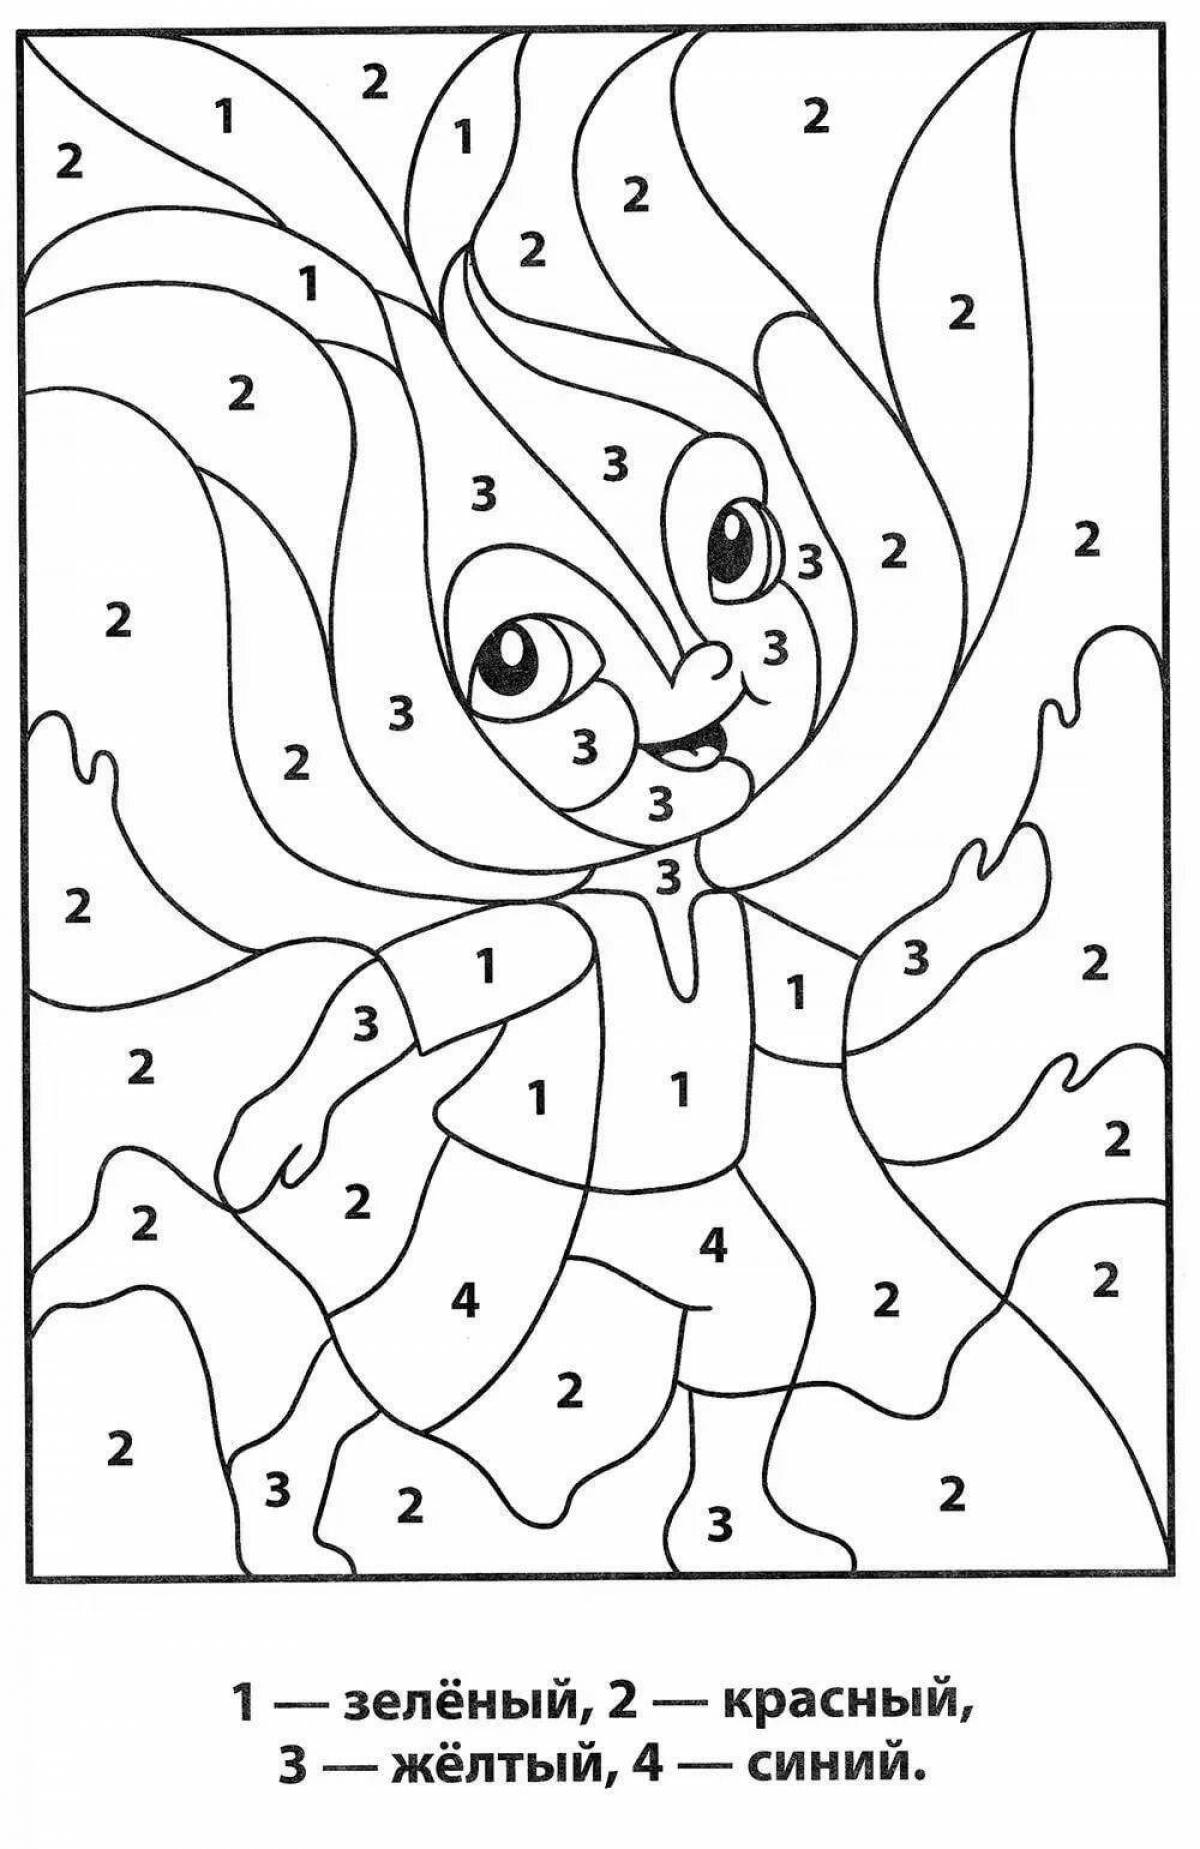 Coloring bright numbers for children